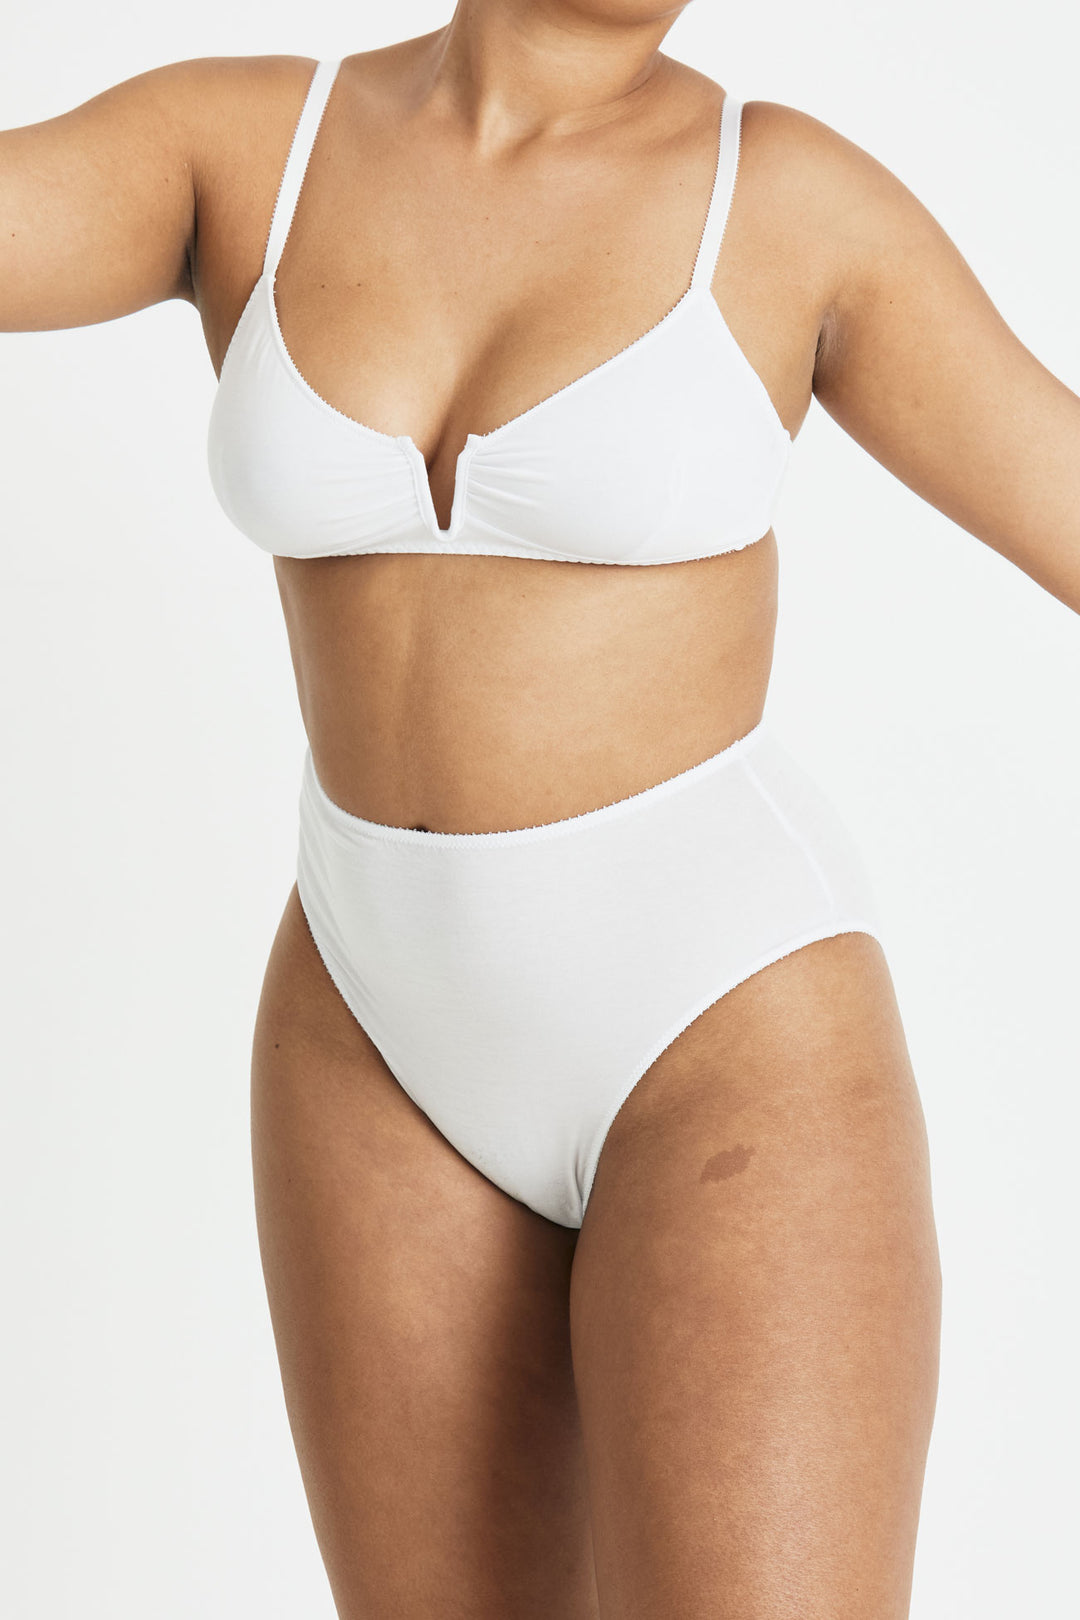 Videris lingerie. This lingerie set is in white. Made from TENCEL™. Our fabric is luxurious, sustainable & oeko tex certified. Ultra comfortable.